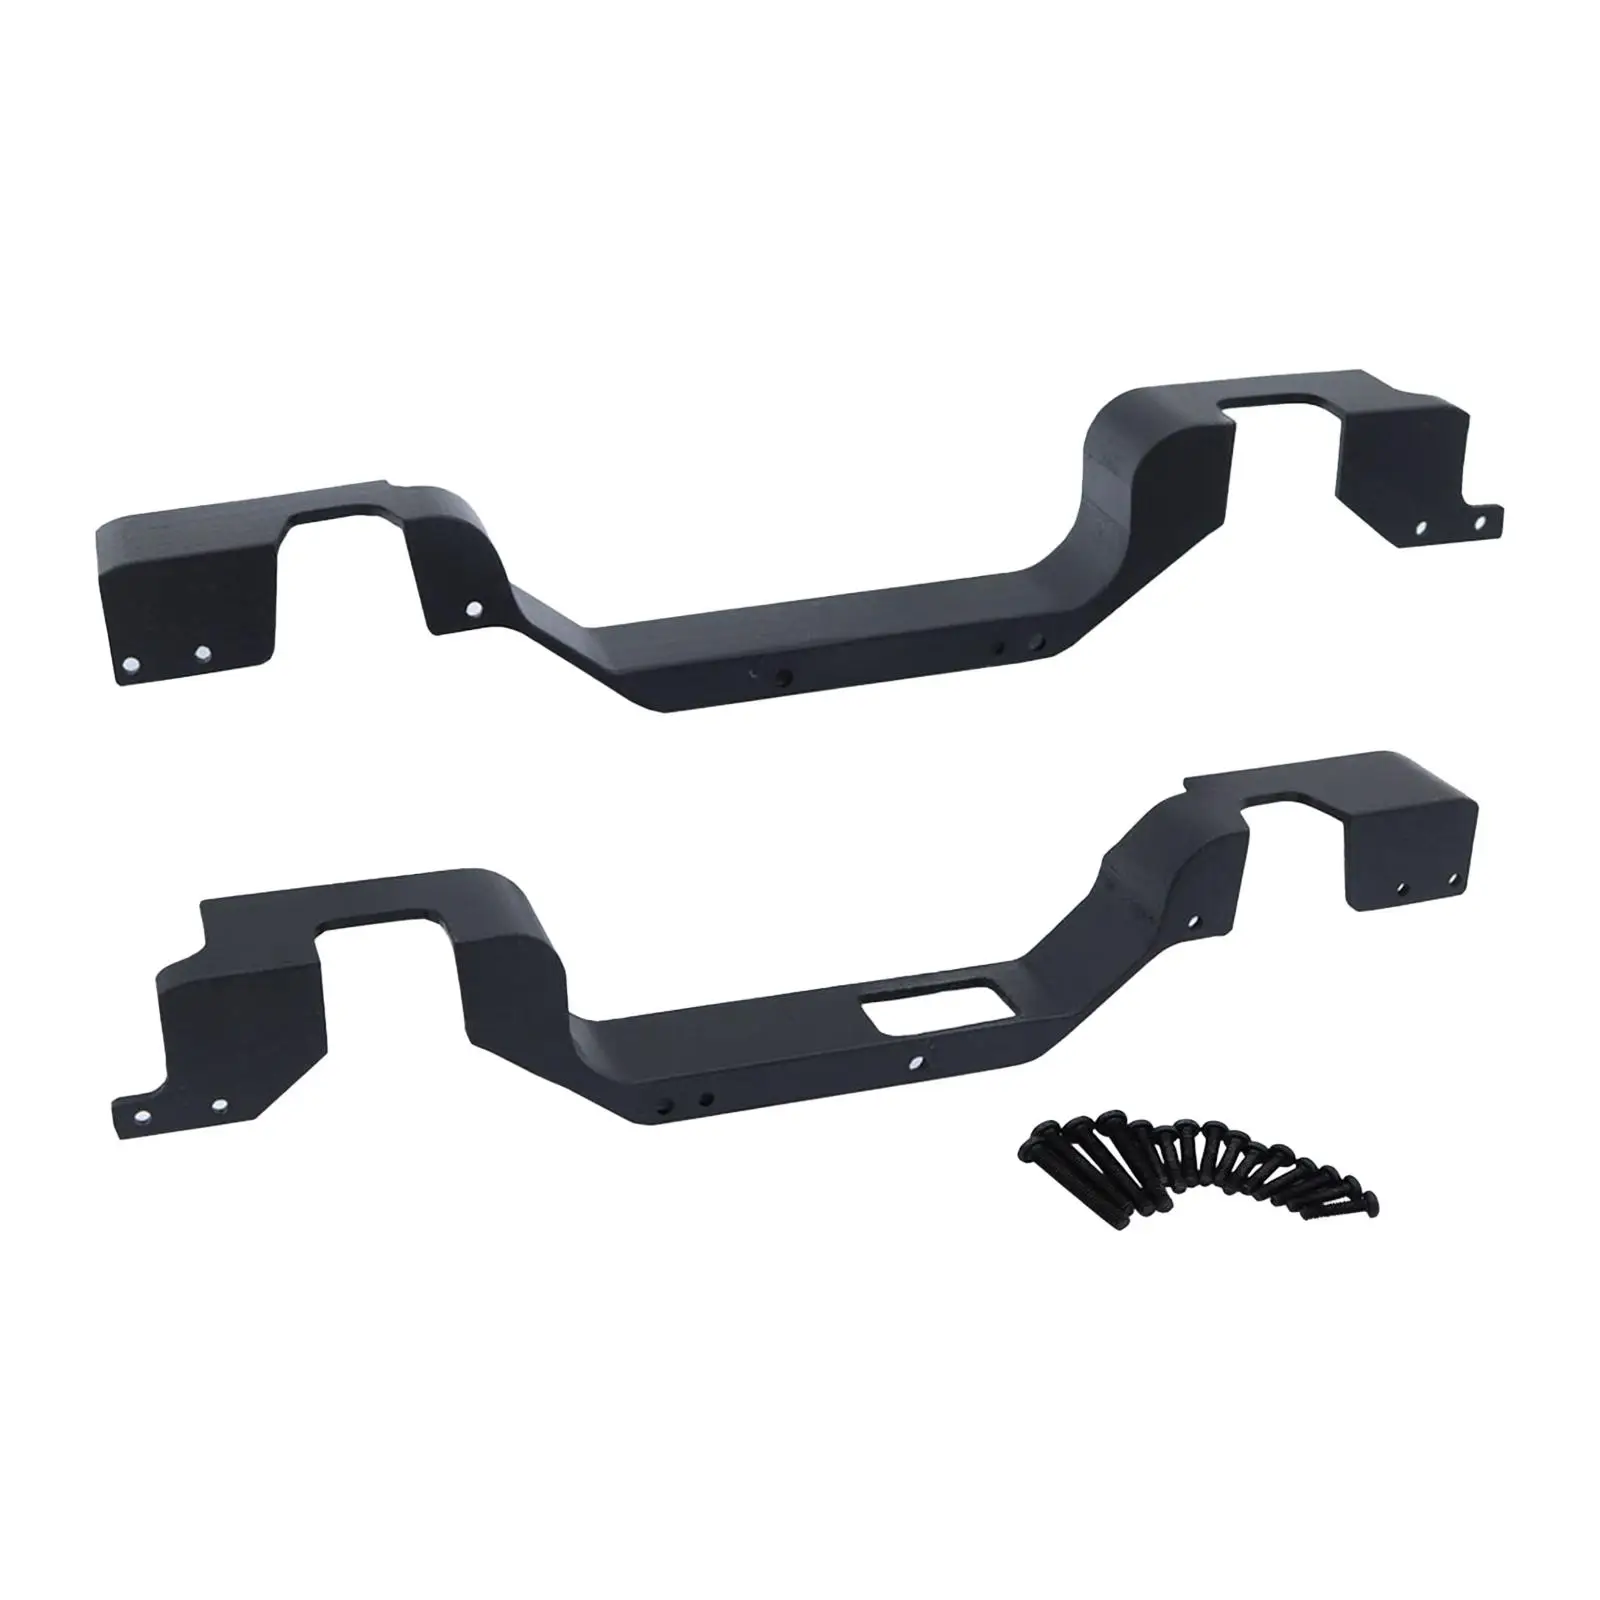 2x Fender Liners Replaces RC Car Fenders for Land Rover 1/18